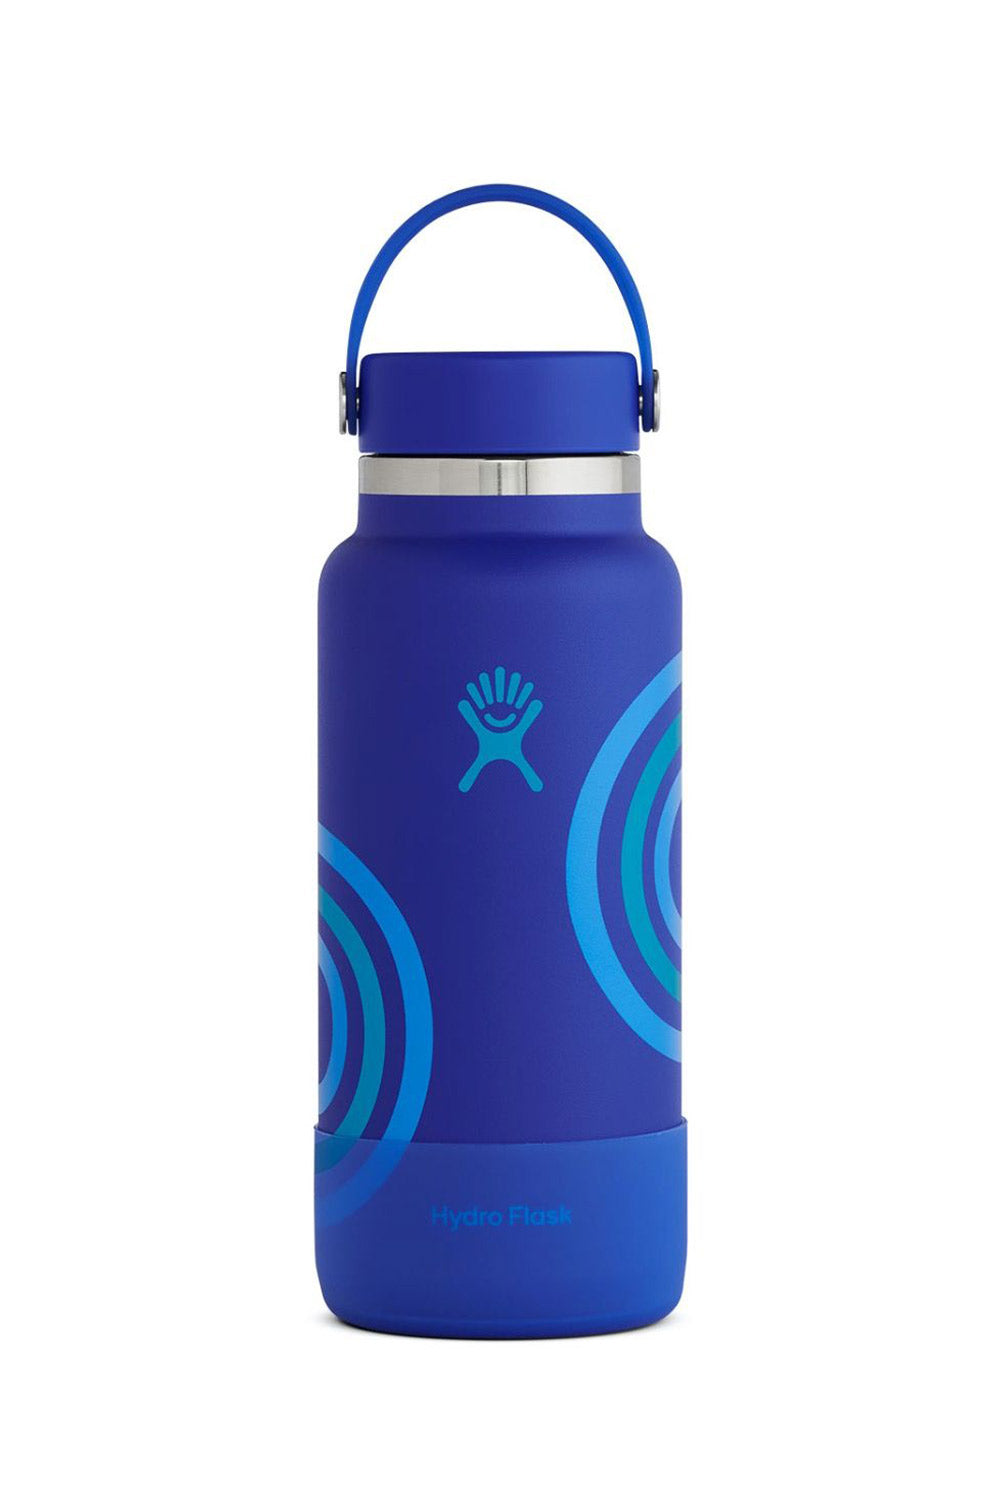 Hydro Flask 32oz (946ml) Wide Mouth Bottle - Refill for Good Edition